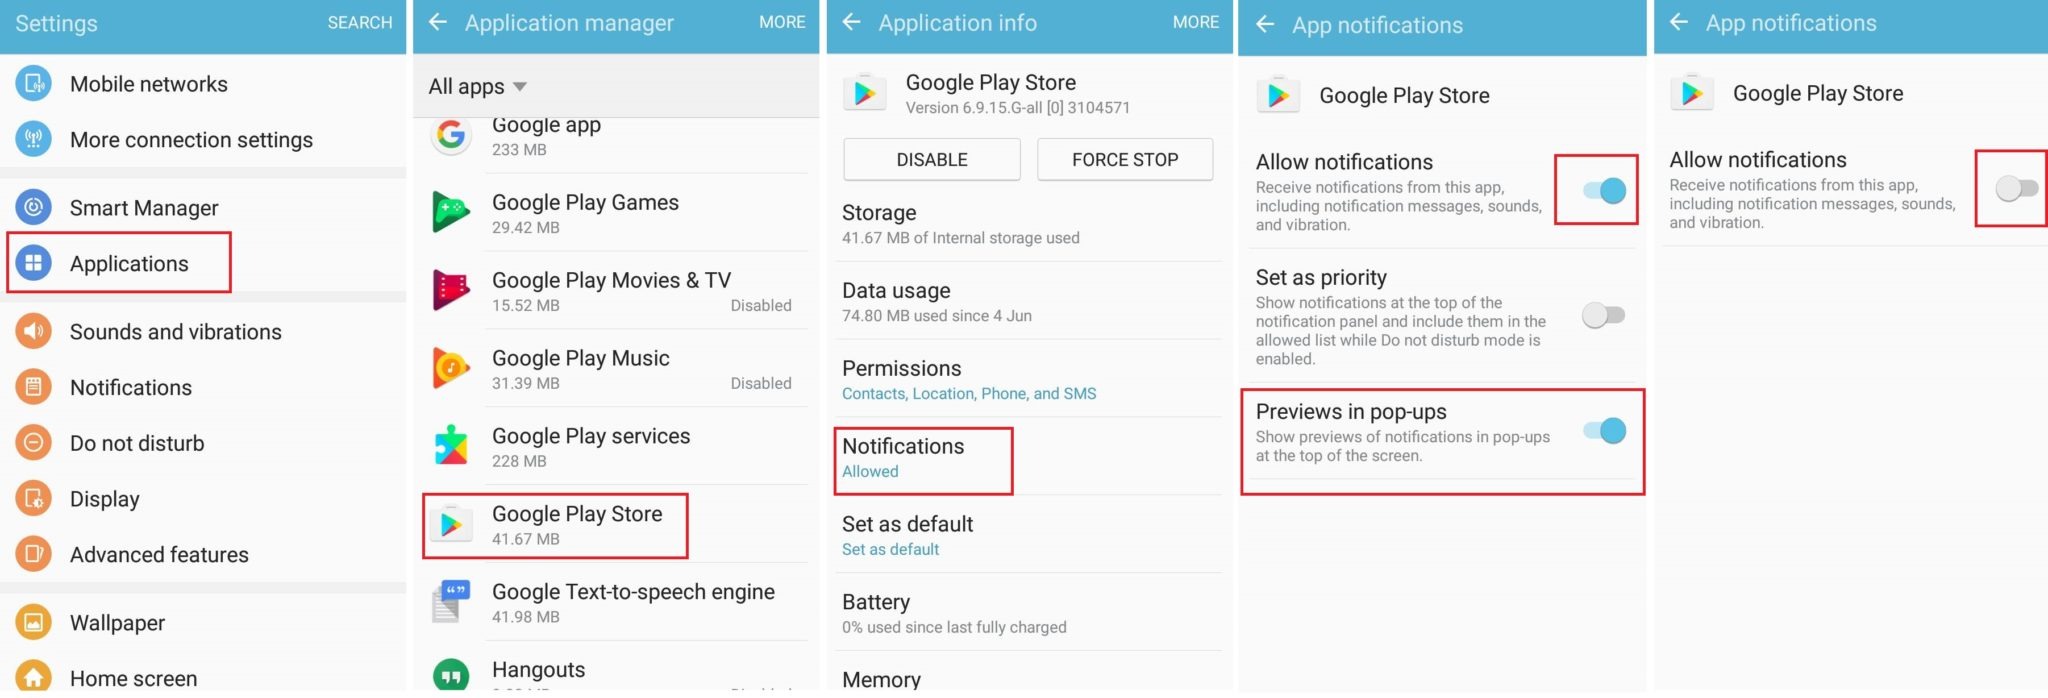 How To Turn Off Notifications On Android